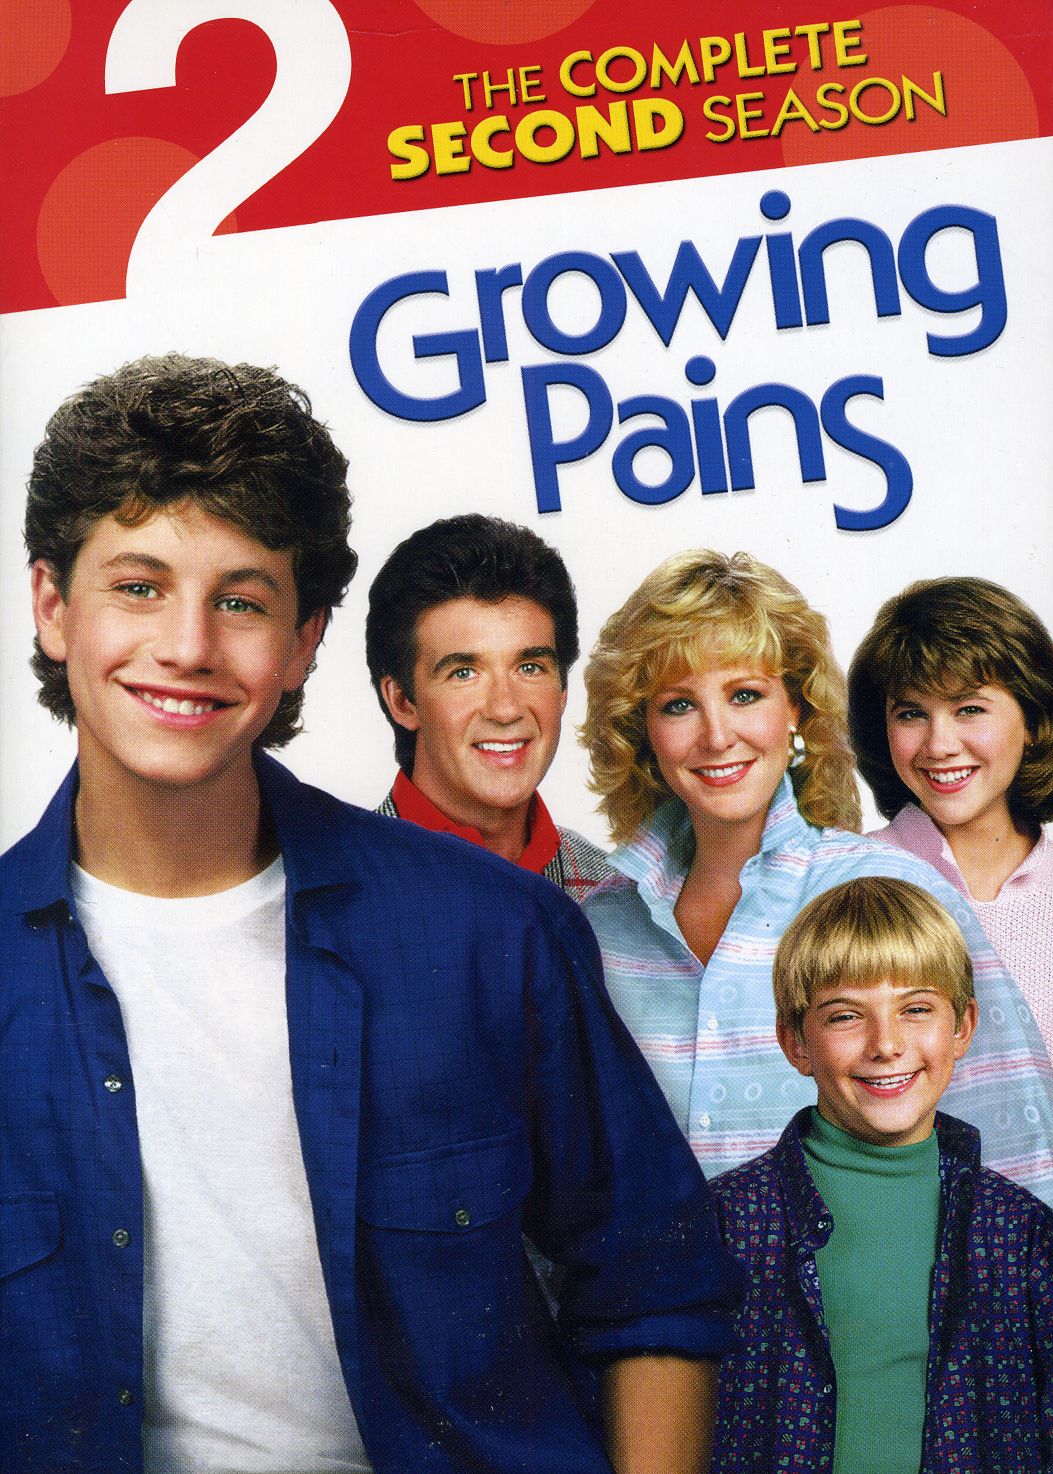 GROWING PAINS: COMPLETE SECOND SEASON (3PC)